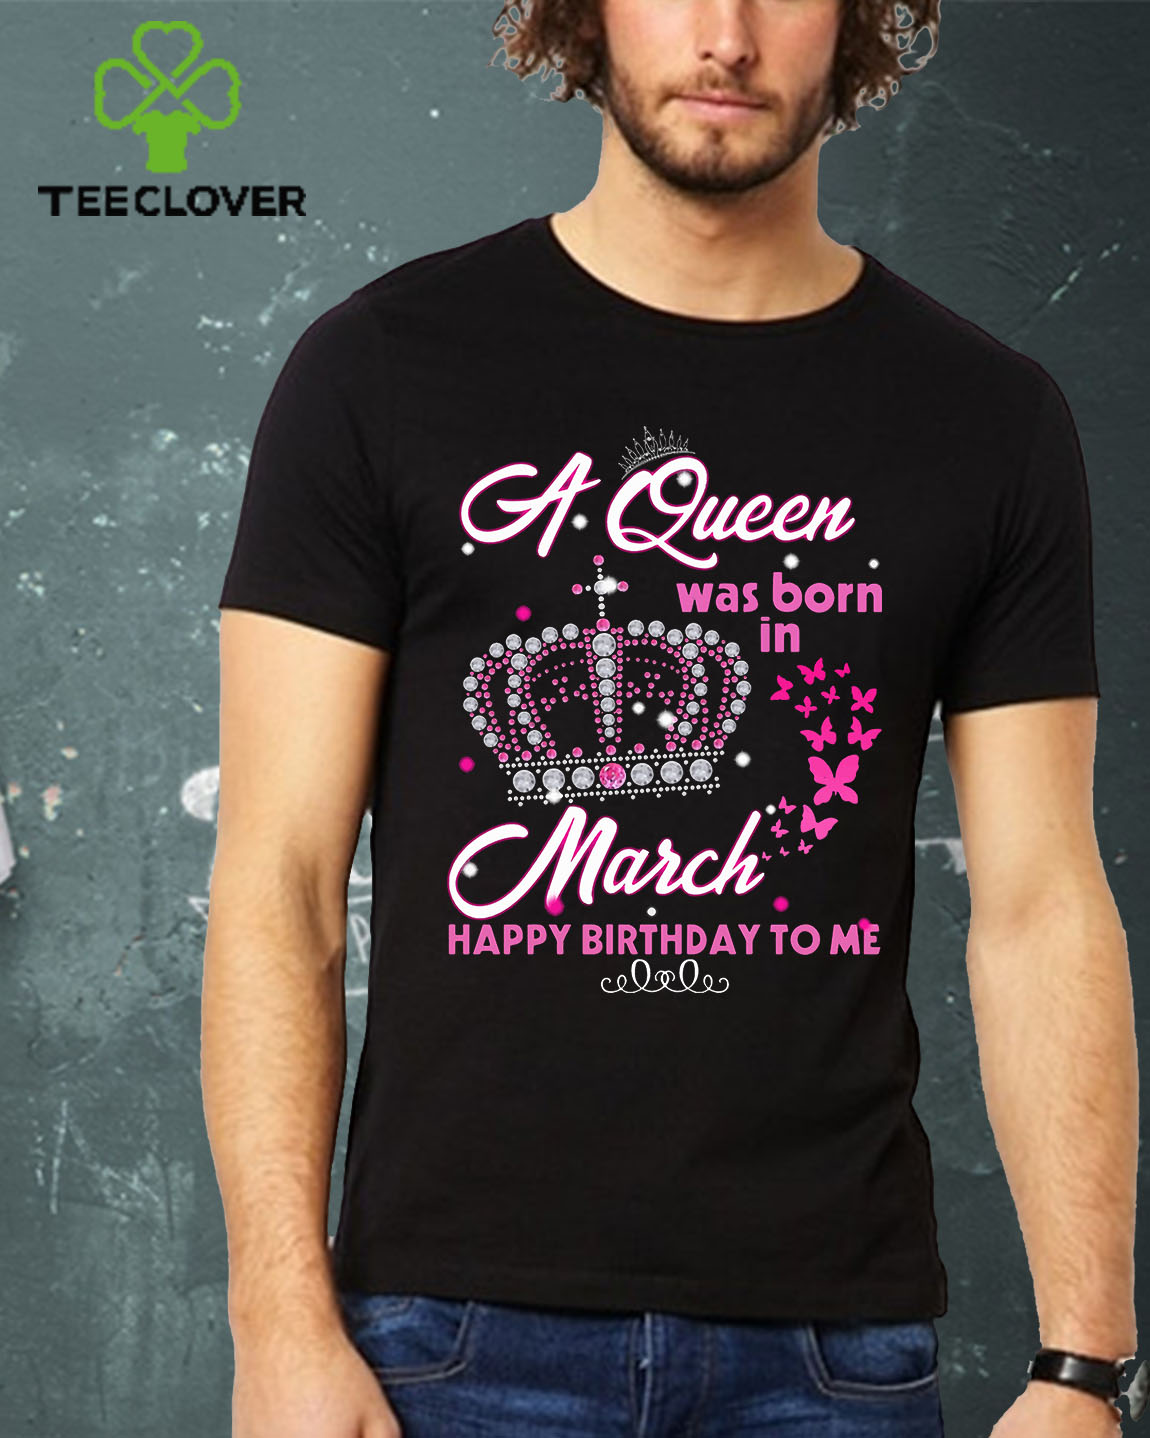 A queen was born in march happy birthday to me T-Shirt